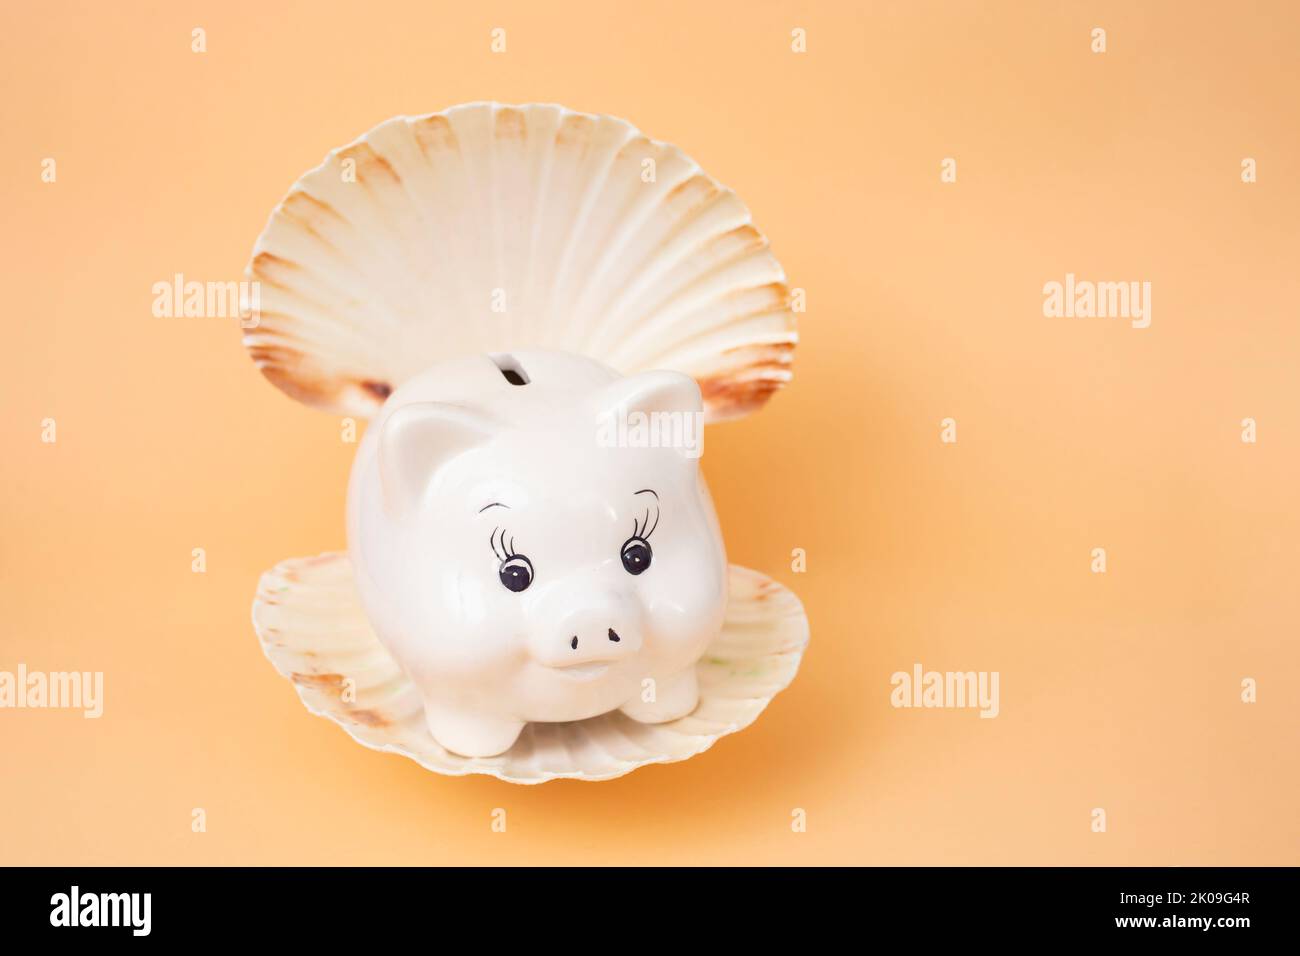 White piggybank in a oyster sea shell on very soft orange background. Exotic vacation savings concept, soft focus close up Stock Photo